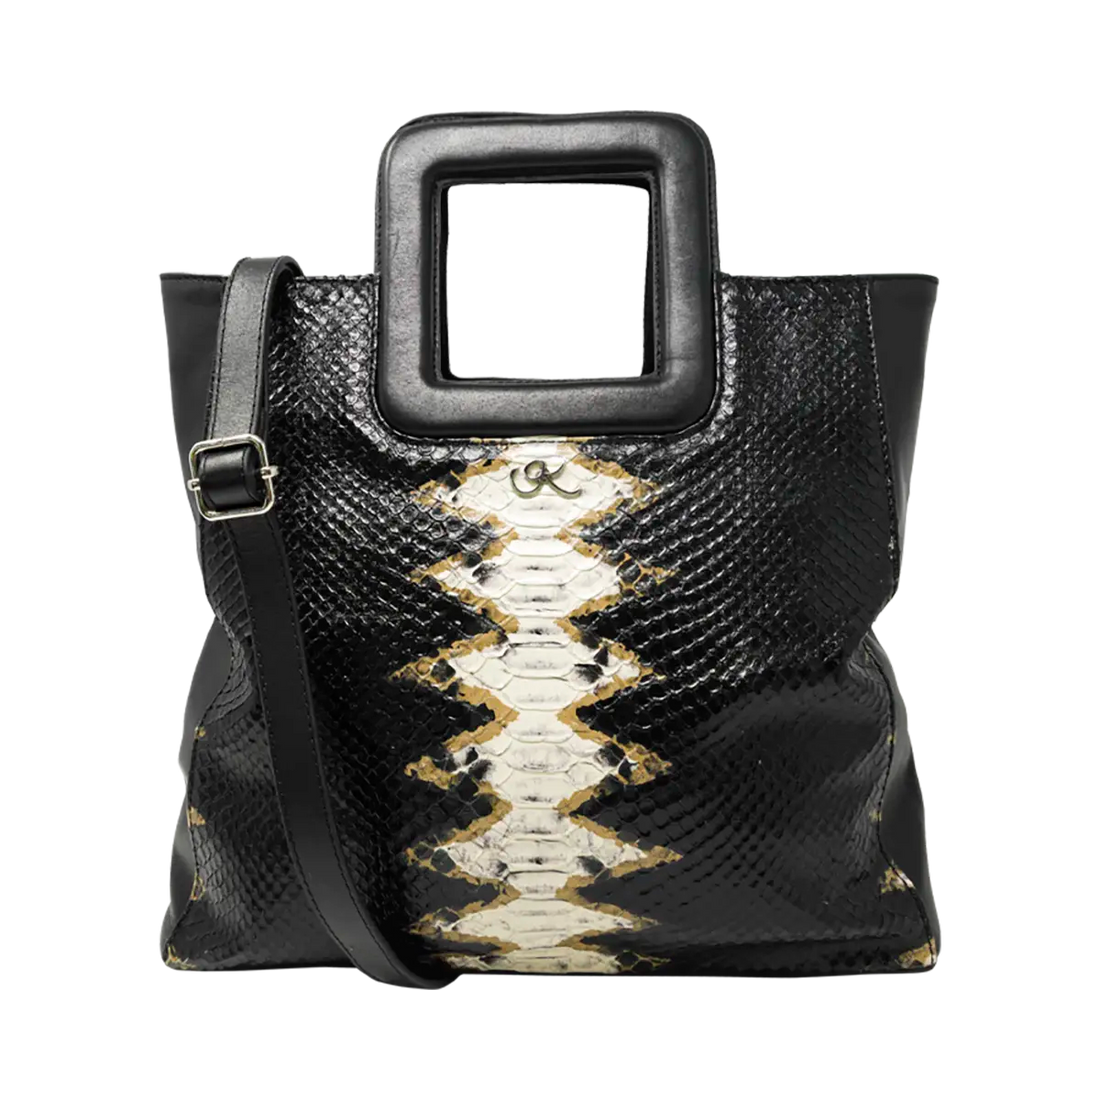 large diamond tsn ltd leather print handbag with a square handle. Accessory for women in San Diego, CA.